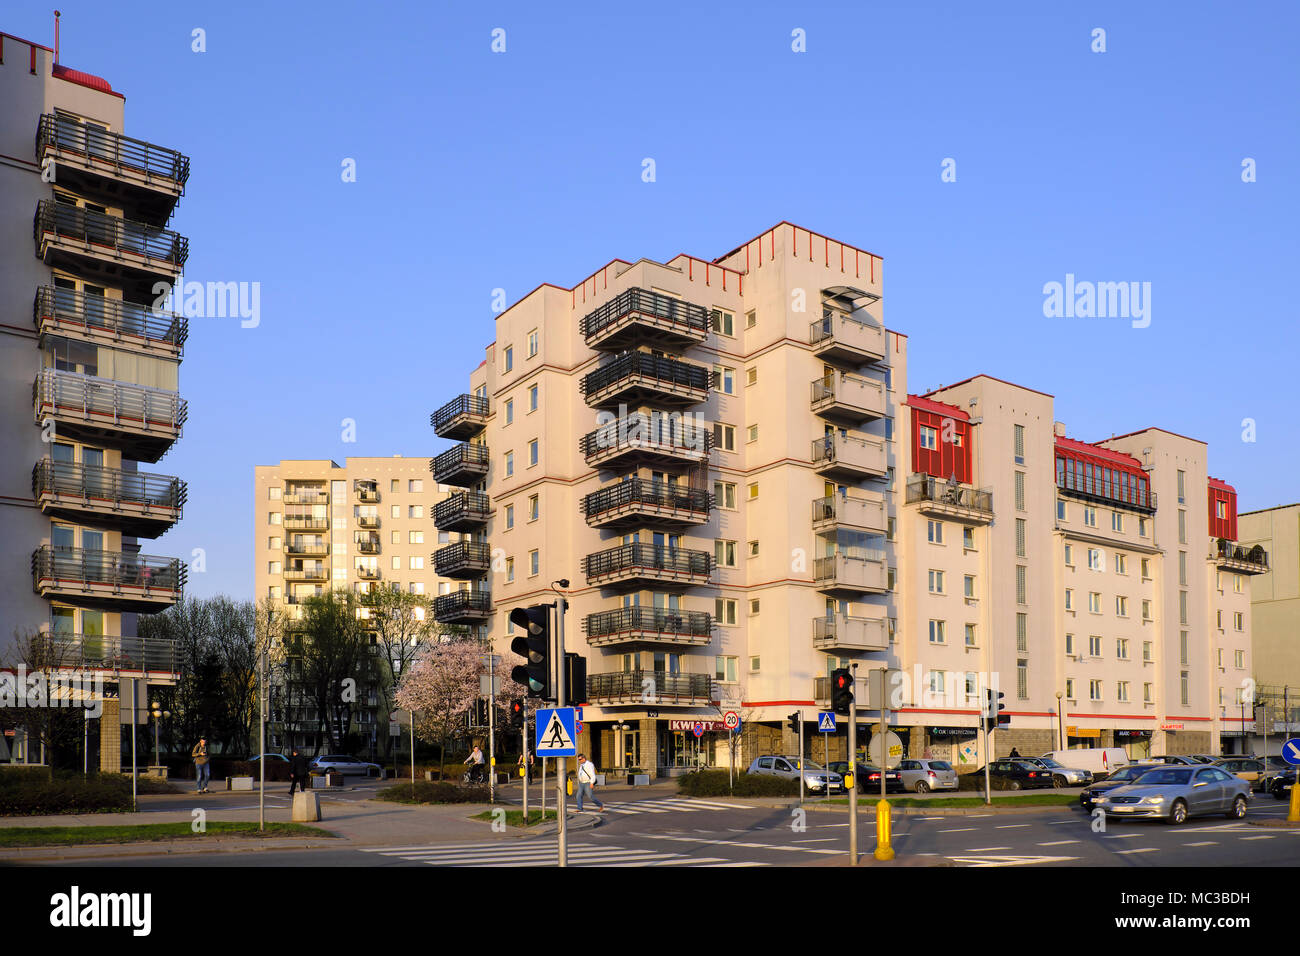 Warsaw, Mazovia / Poland - 2018/04/12: Stoklosy quarter in Ursynow - residential district in southern Warsaw featuring modern housing with along main  Stock Photo